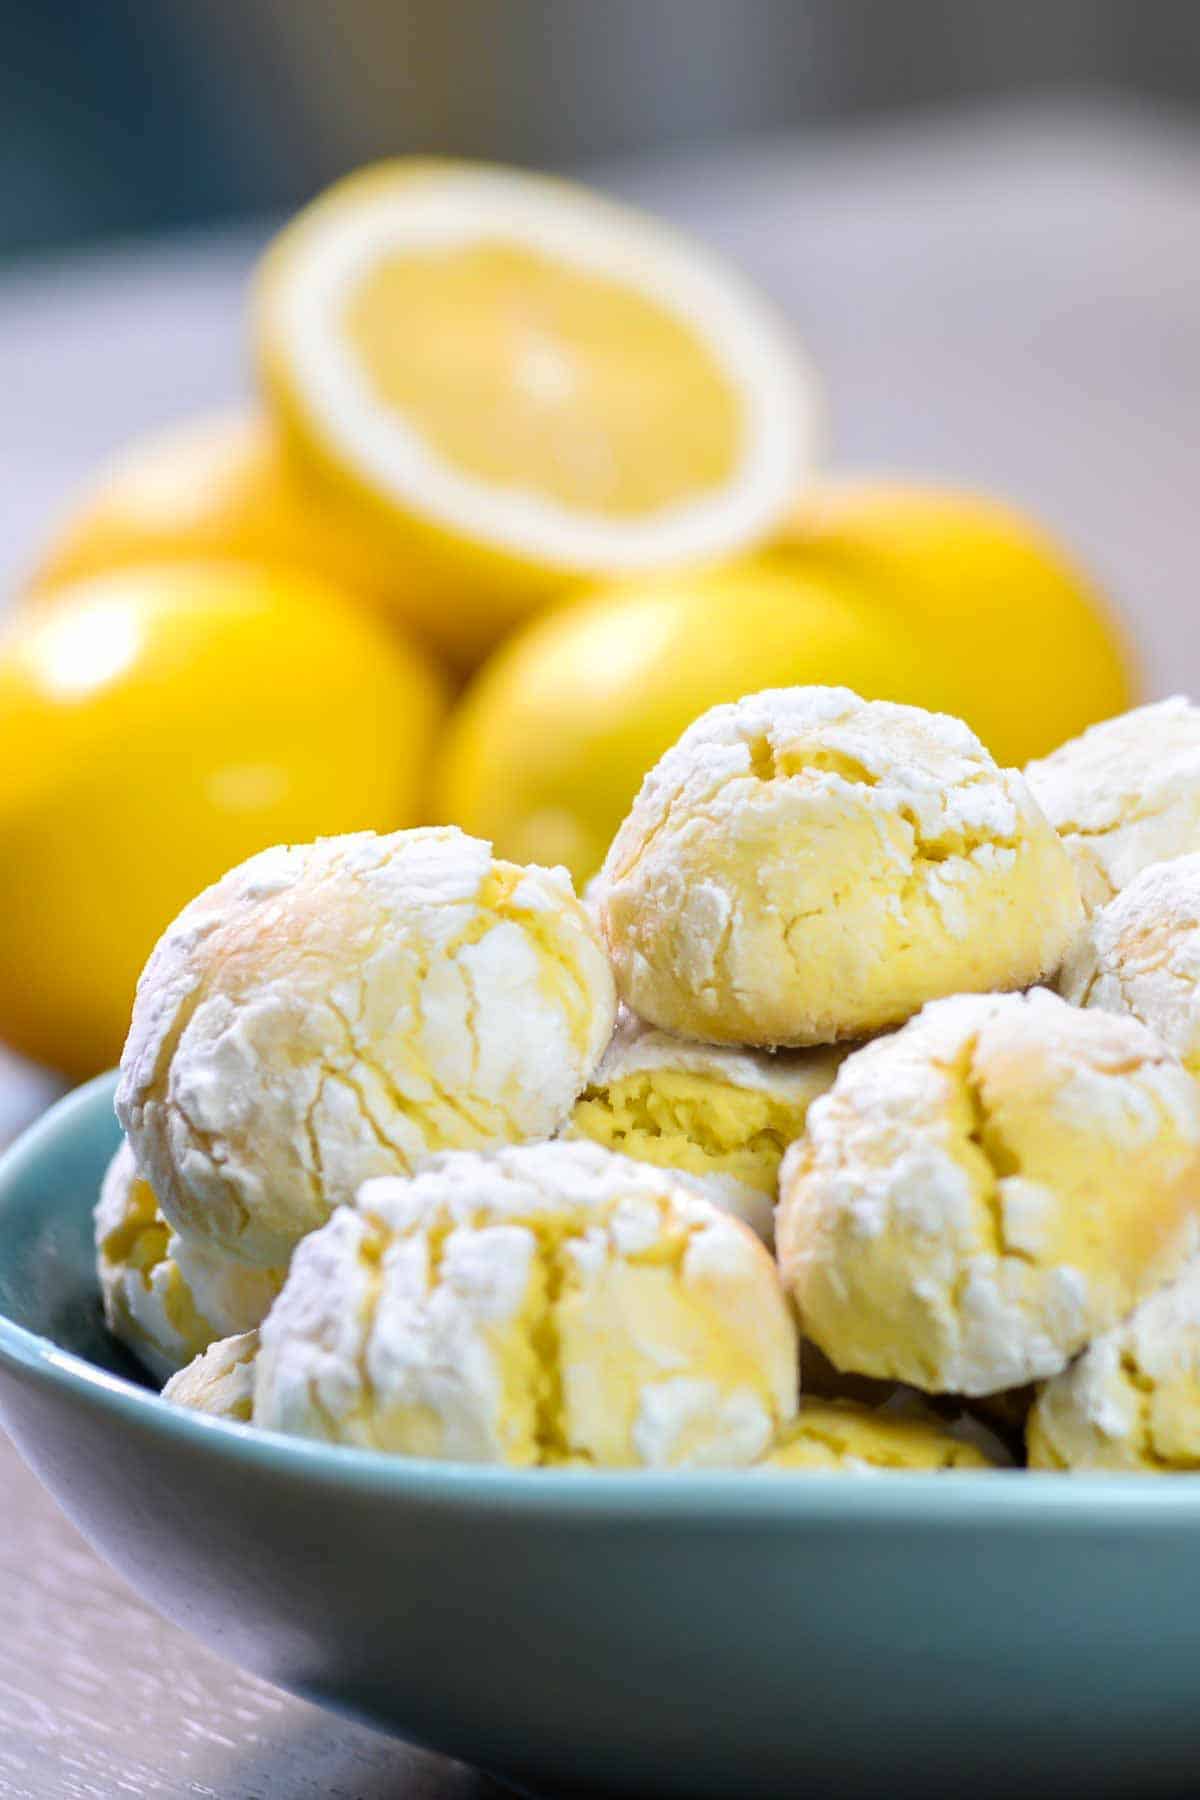 lemon amaretti cookies made with almond flour on a blue plate with fresh lemons in the background